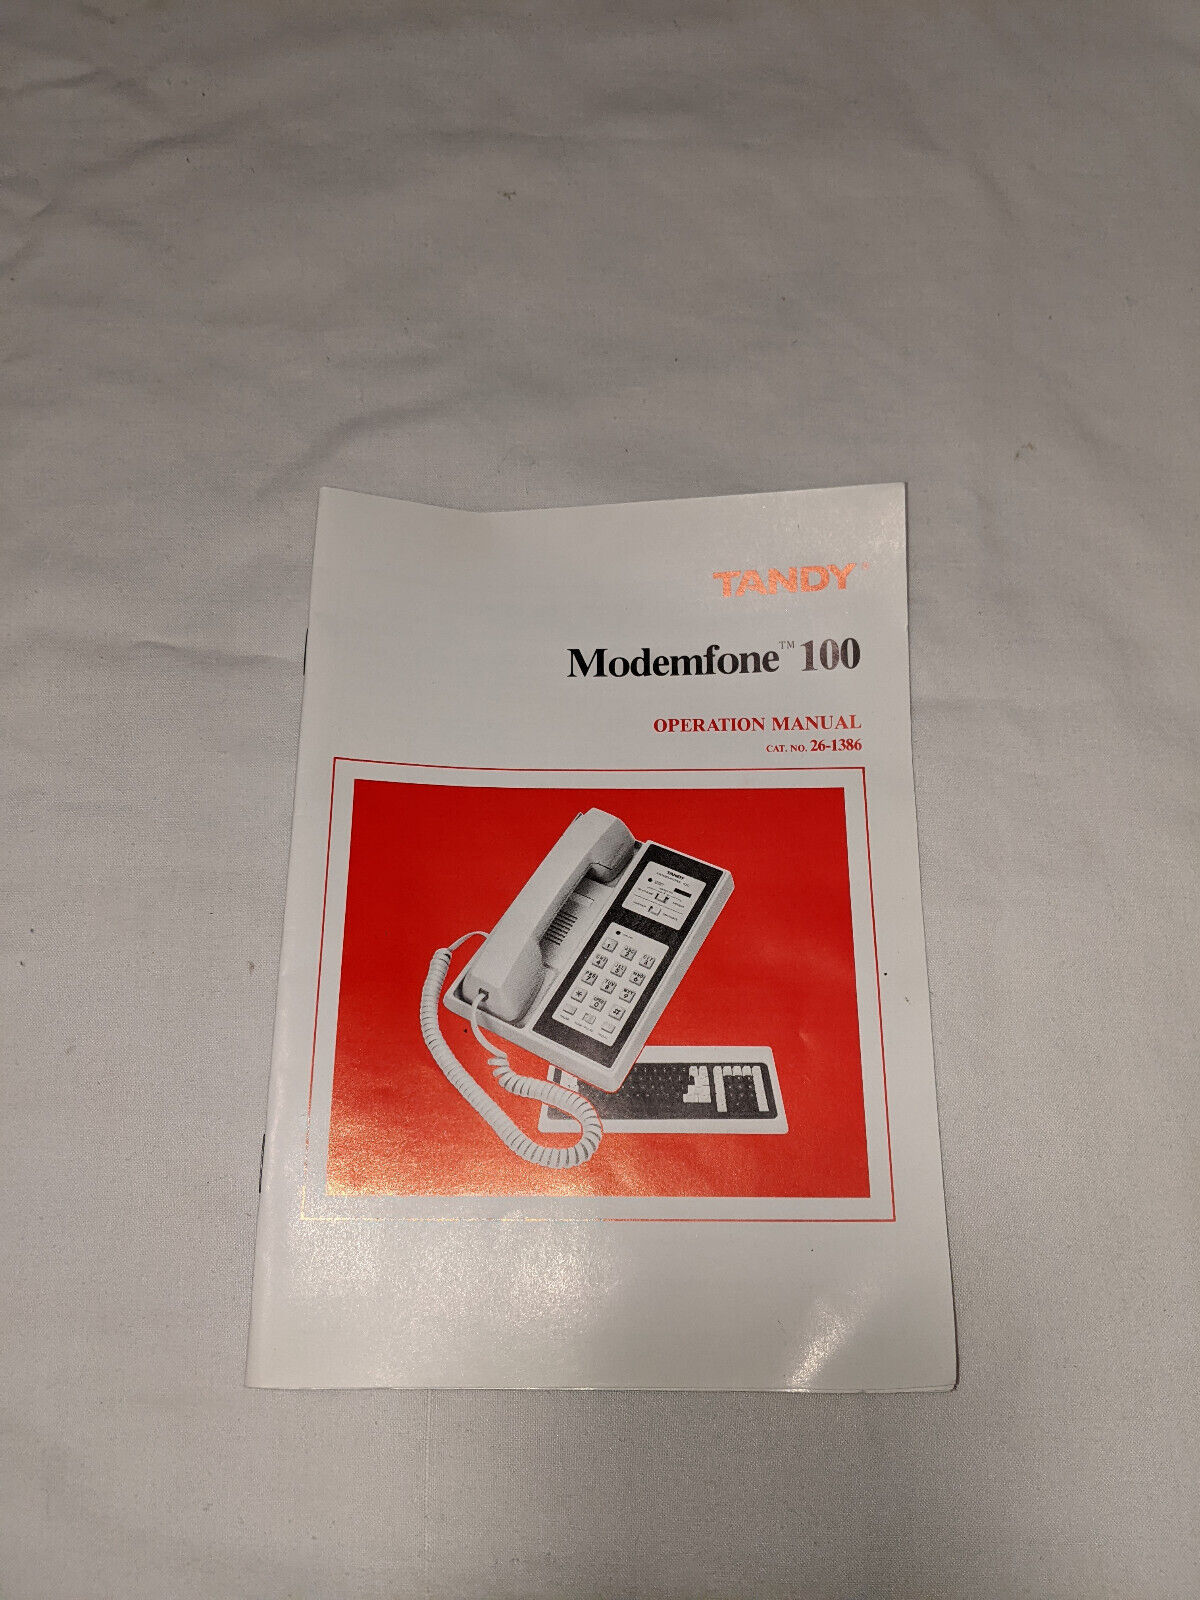 Vintage 1985 Tandy Modemfone 100 Operation Manual - Schematic Specs 28 pages